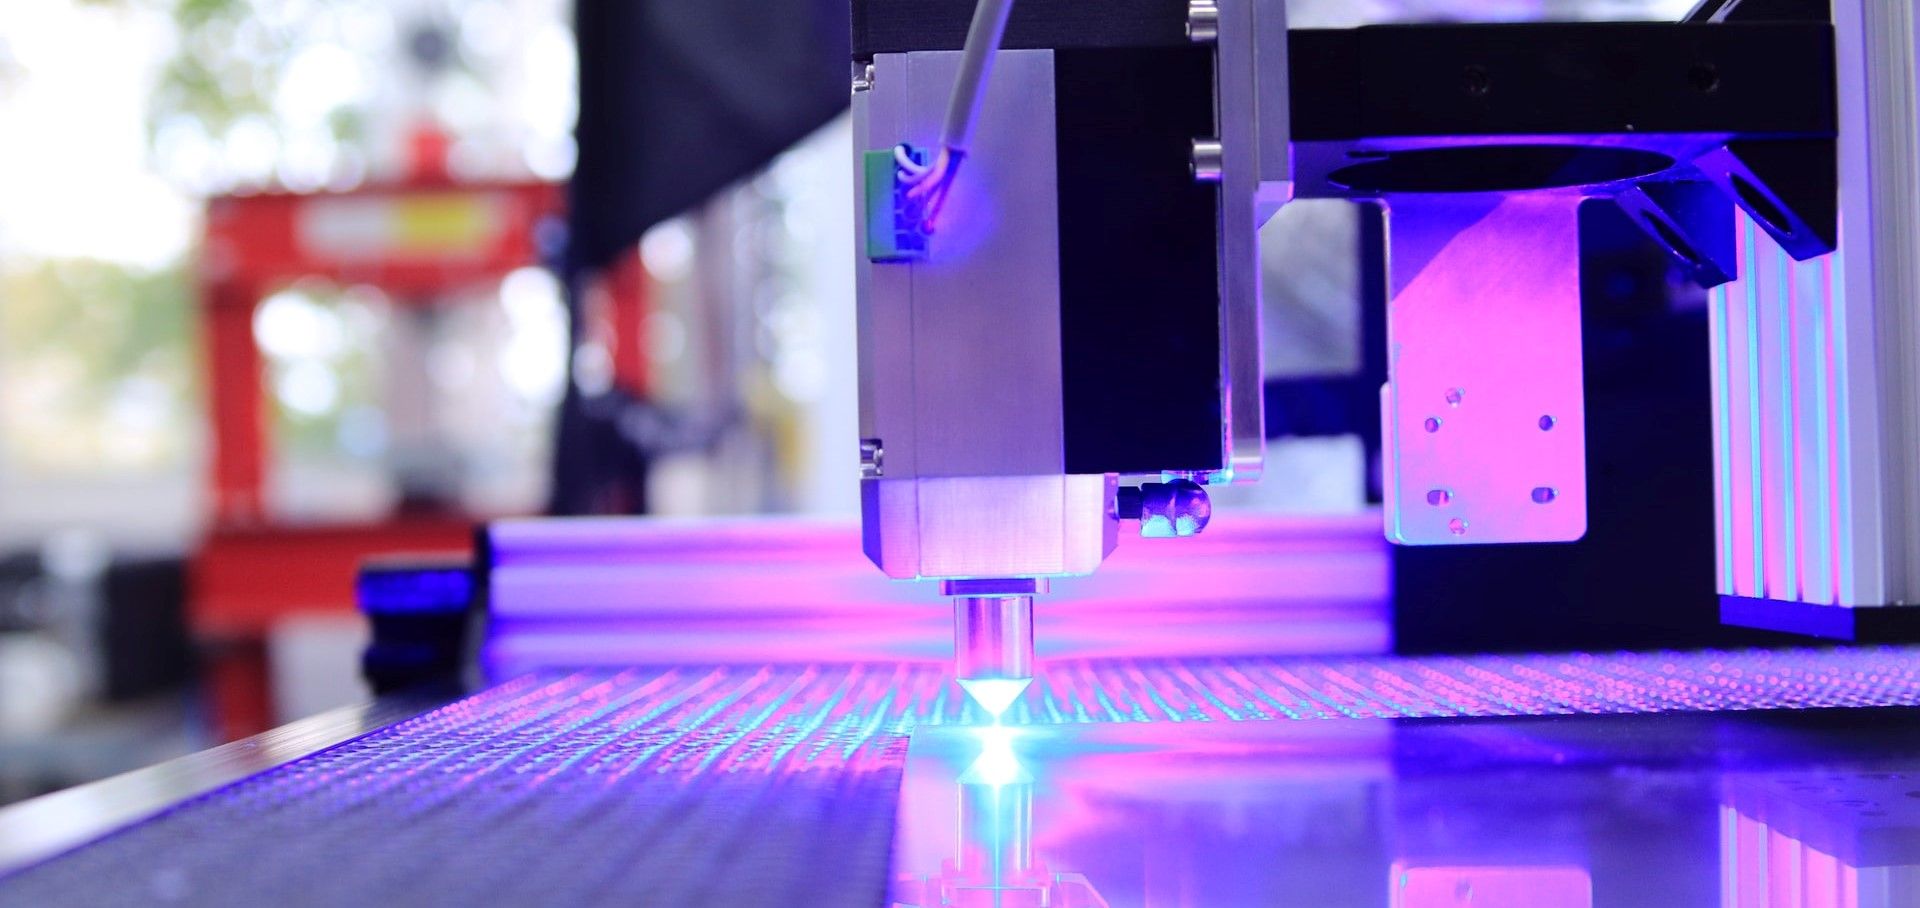 3d printing machine with purple and white led lights